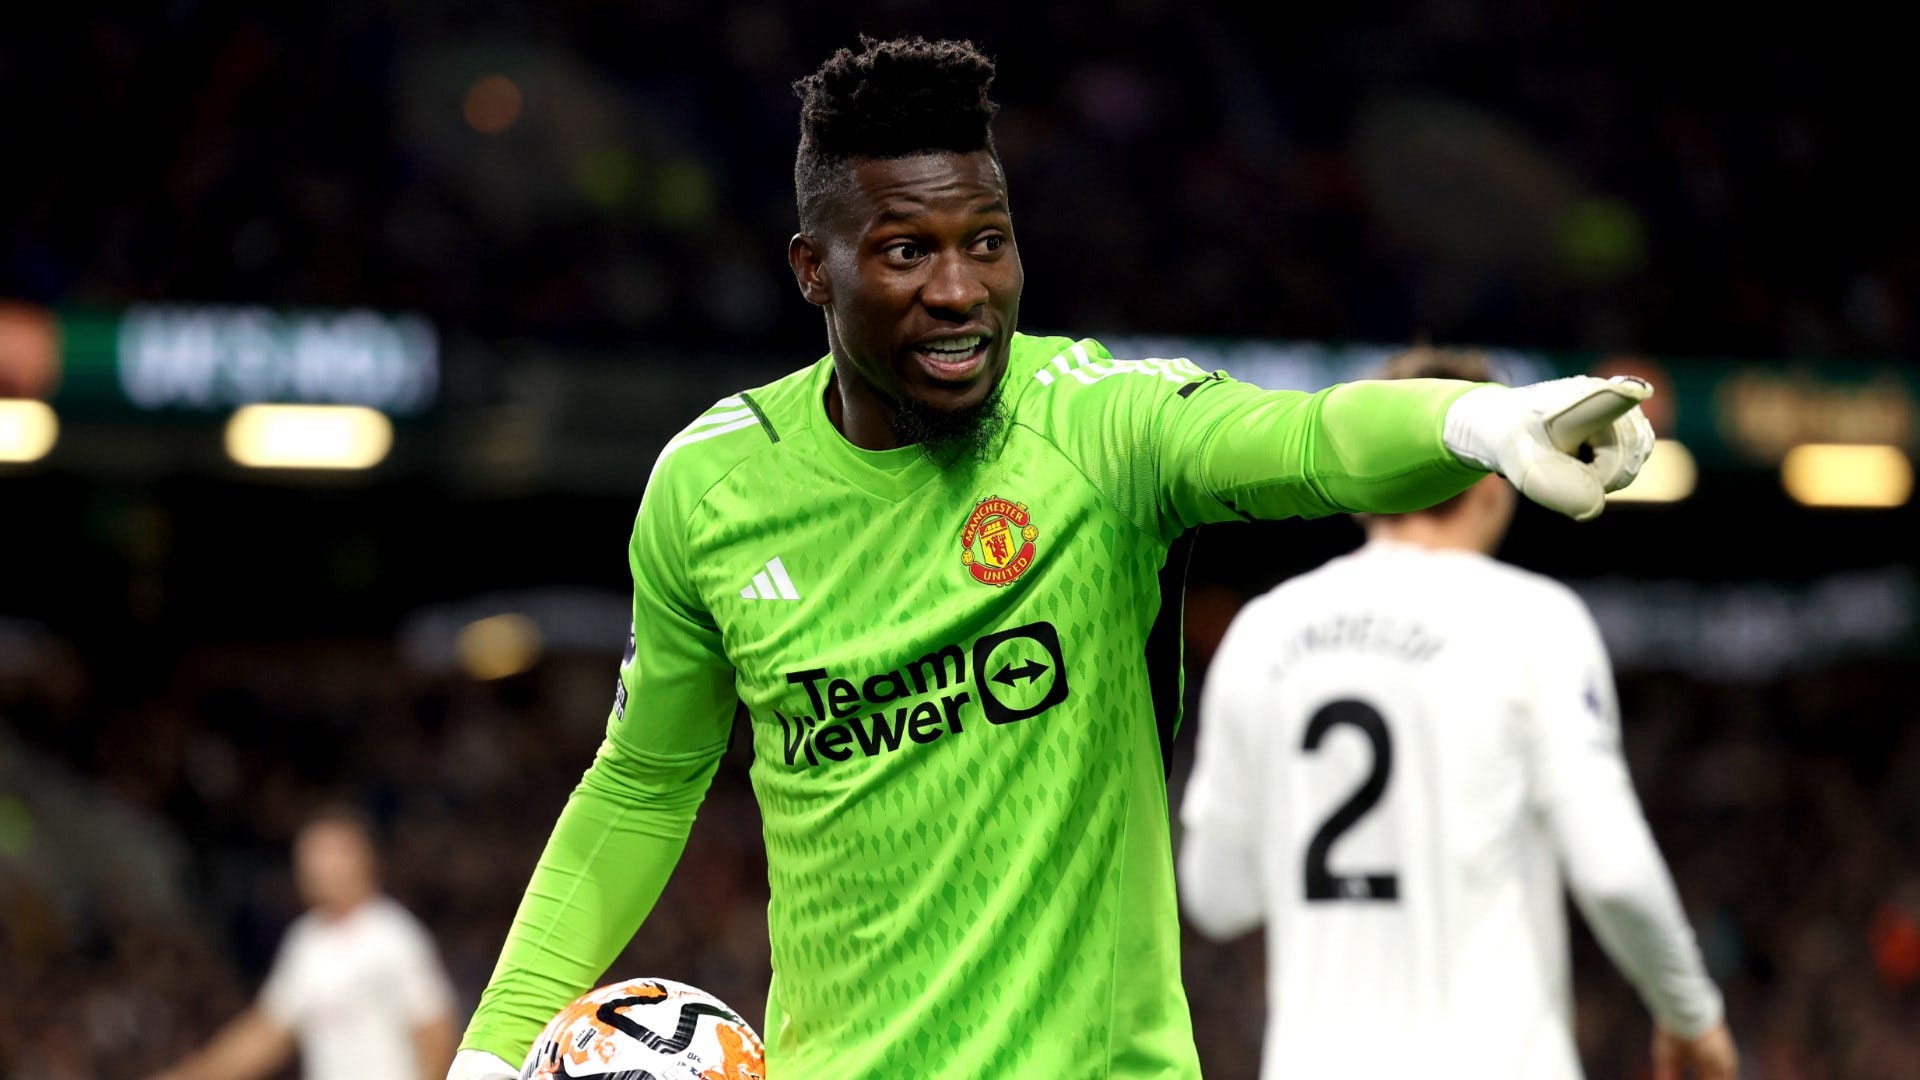 'He's a winner' - Daley Blind labels Andre Onana 'one of the great' goalkeepers in world football despite awful start at Man Utd